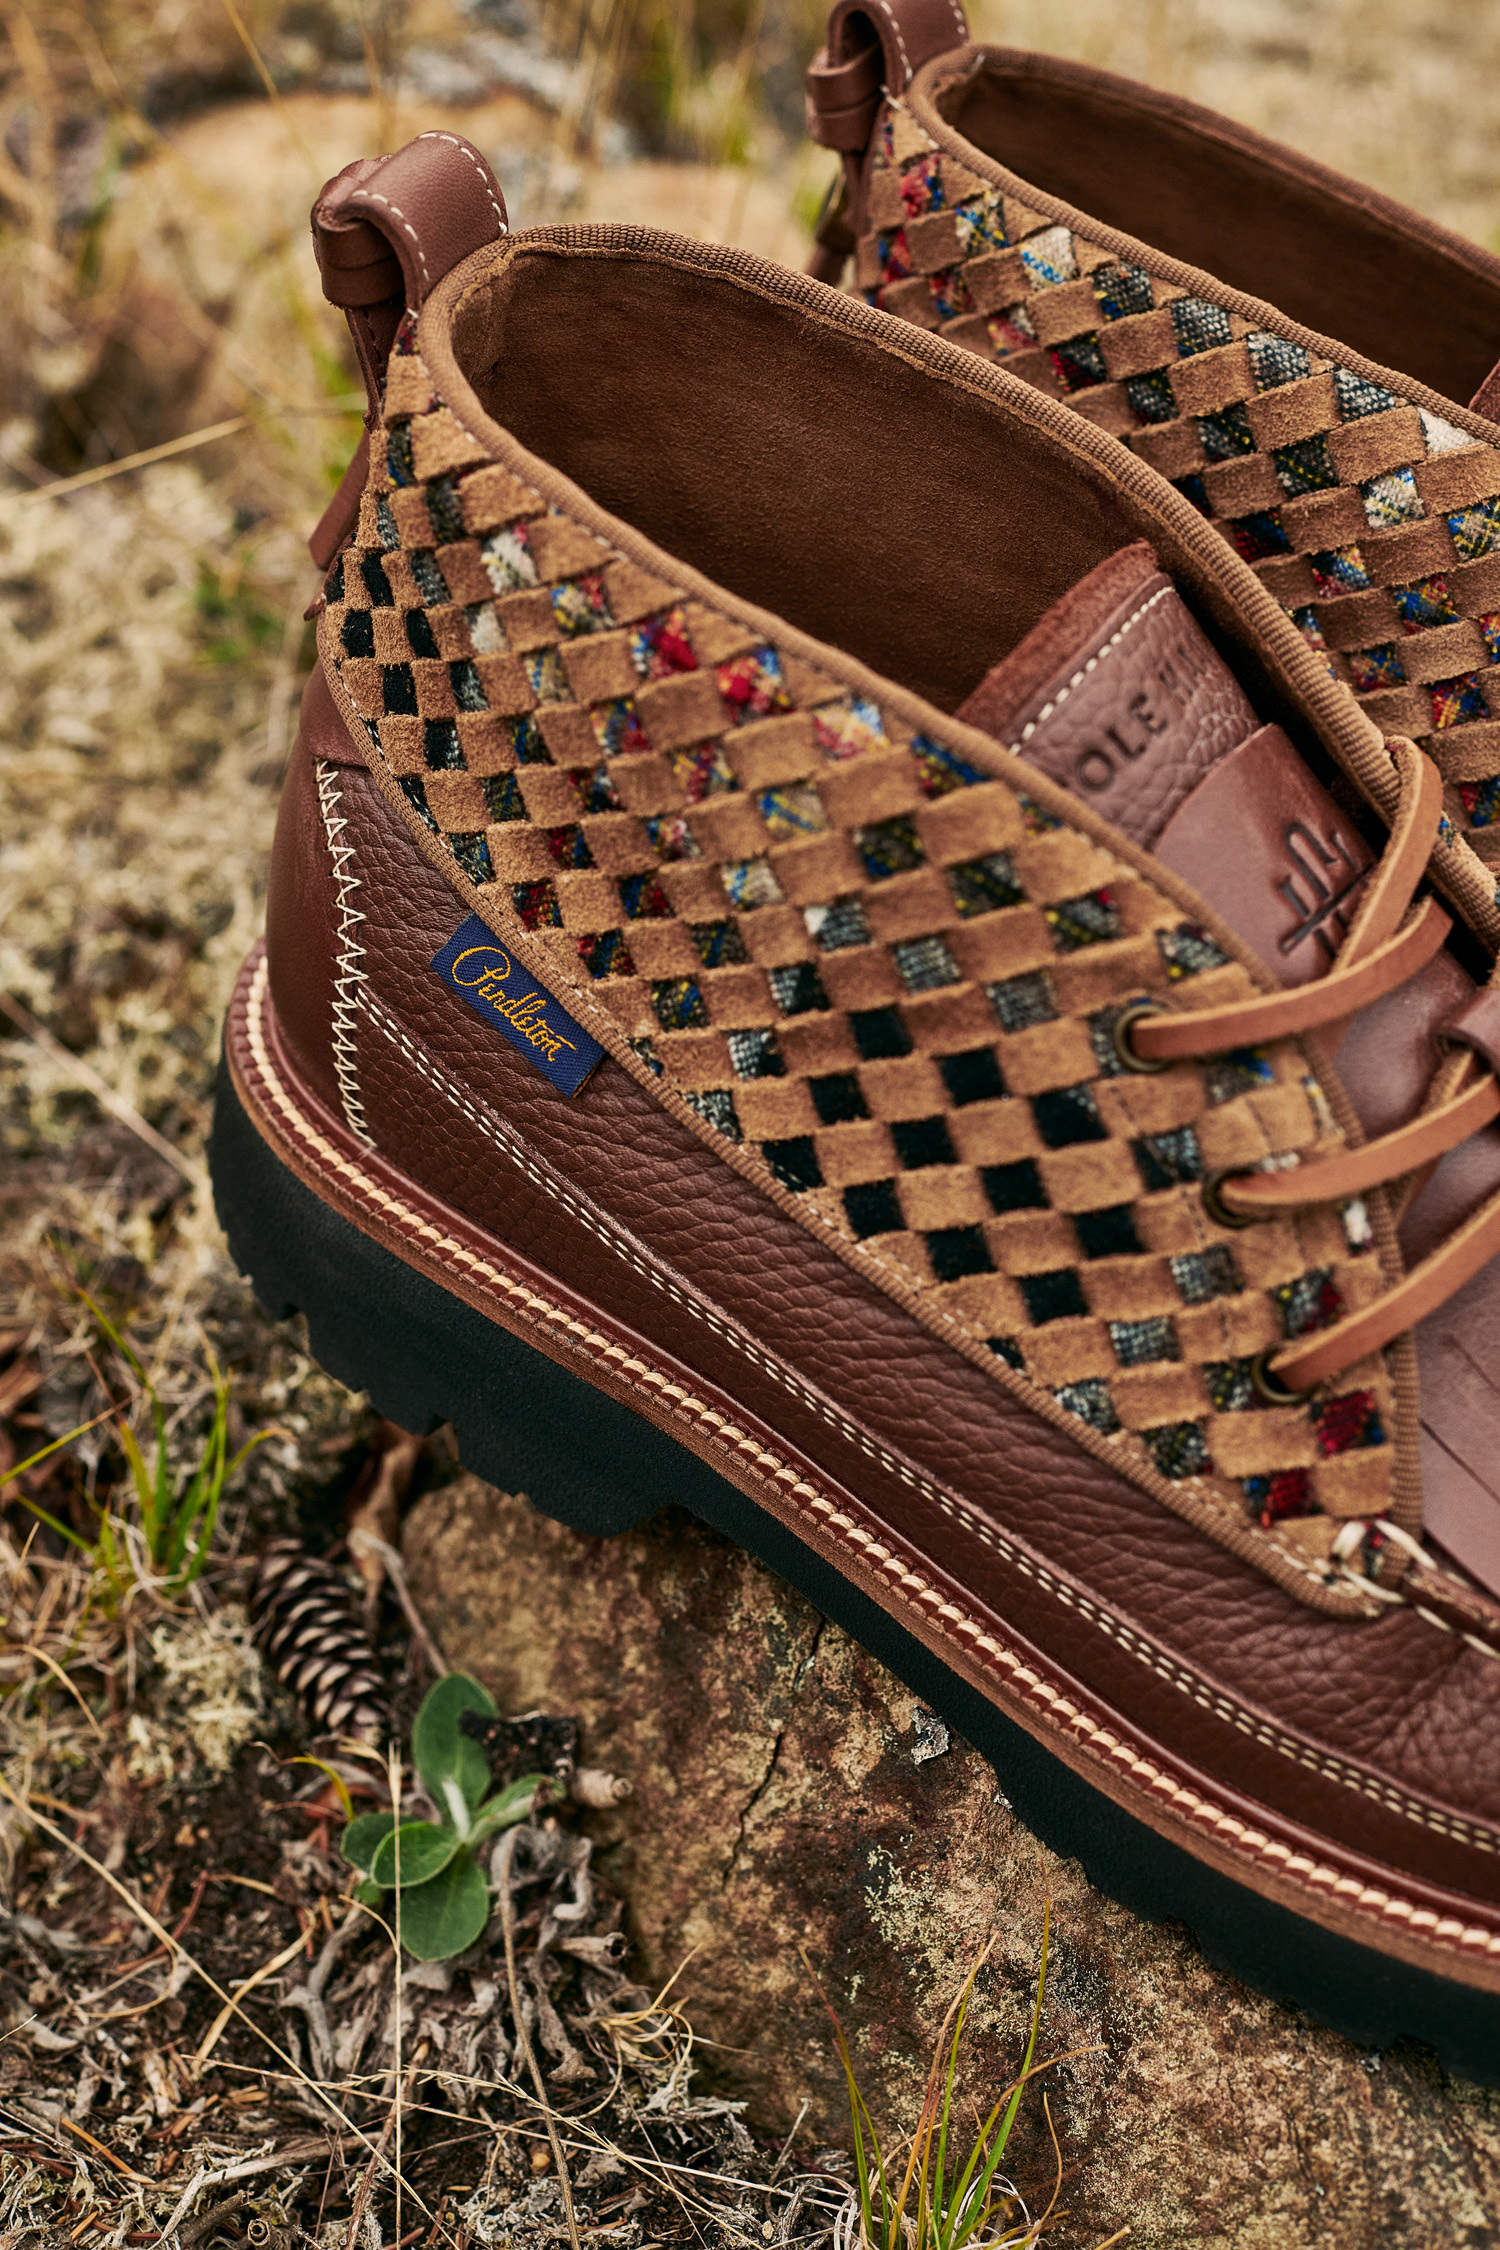 Cole Haan Announces Collaboration with Pendleton Woolen Mills